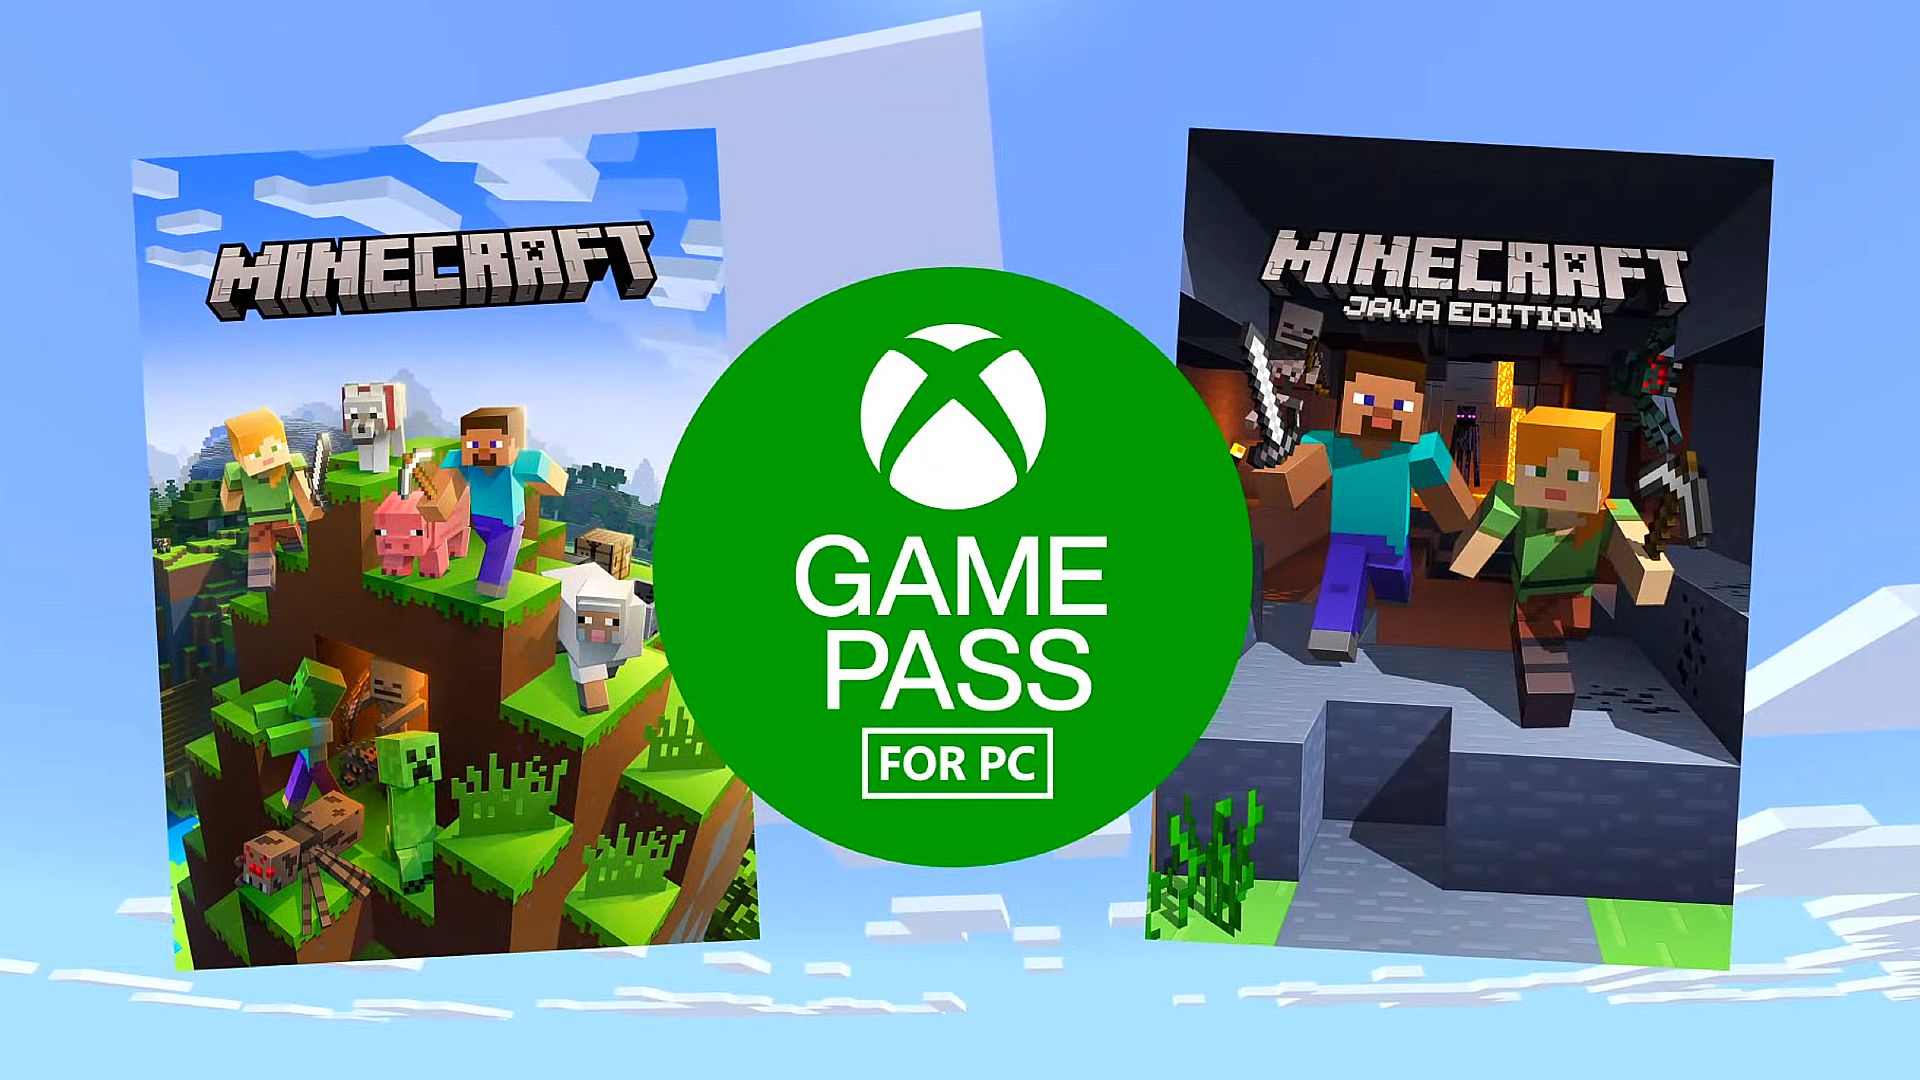 Minecraft Java Edition and Bedrock Edition are coming to Xbox Game Pass for PC